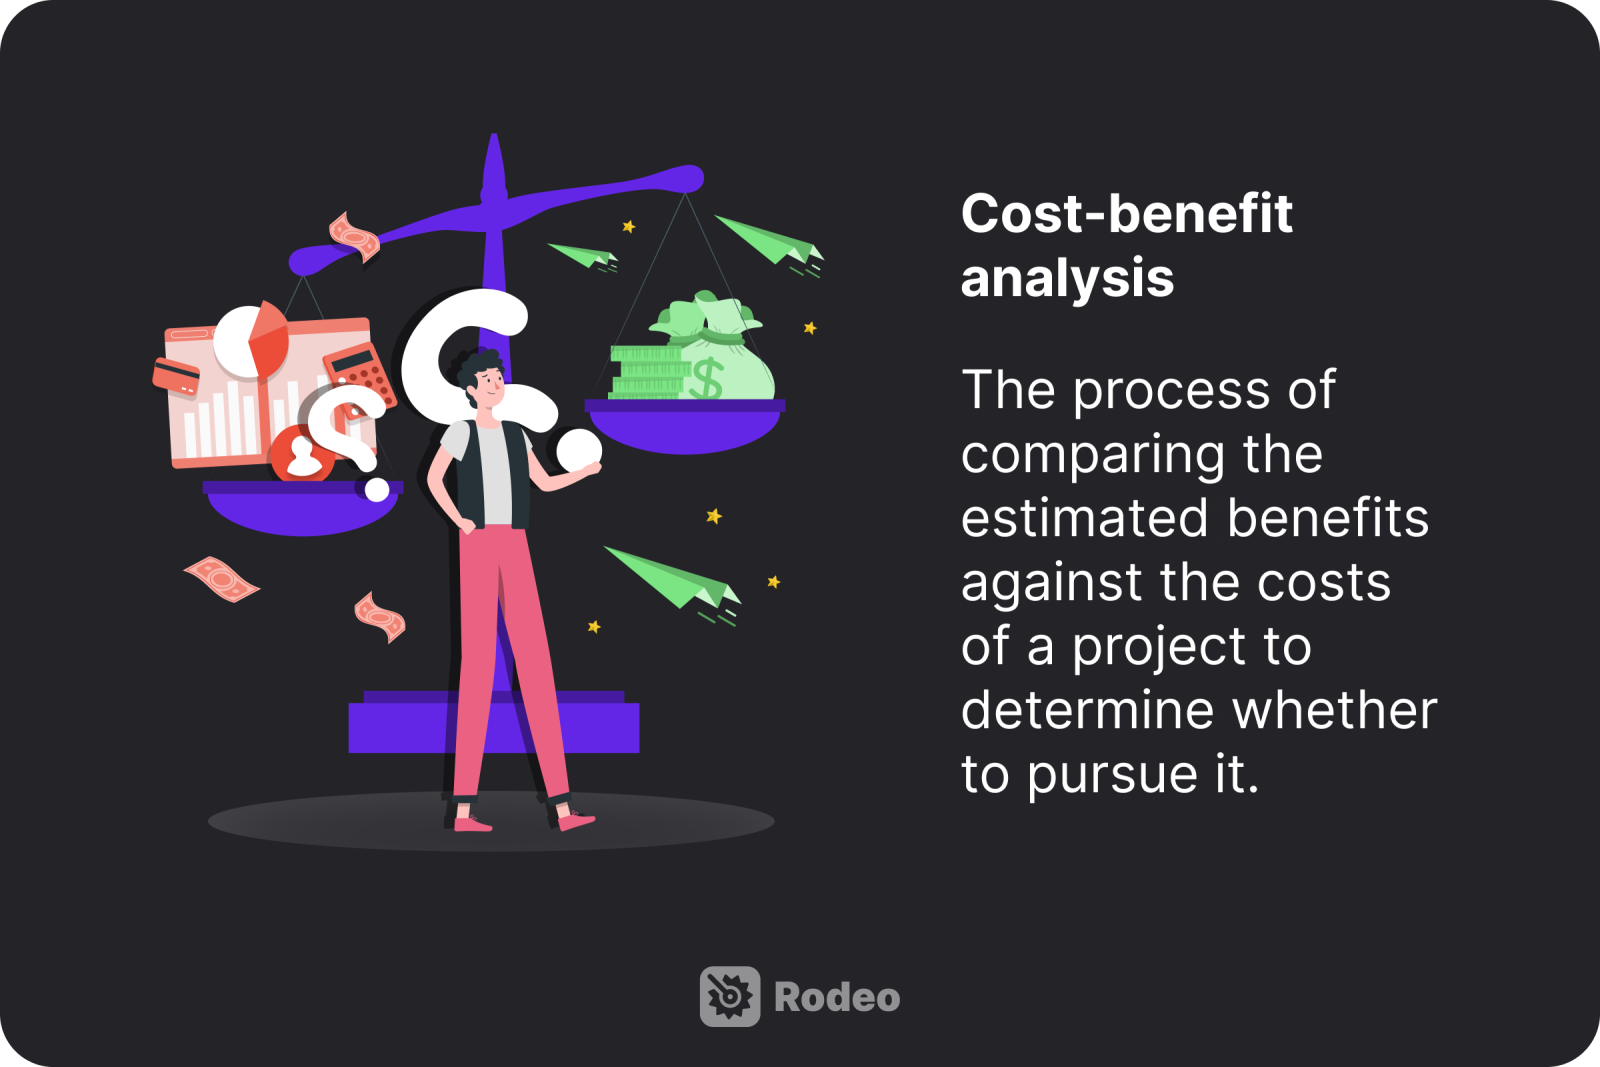 Cost Benefit Analysis explained